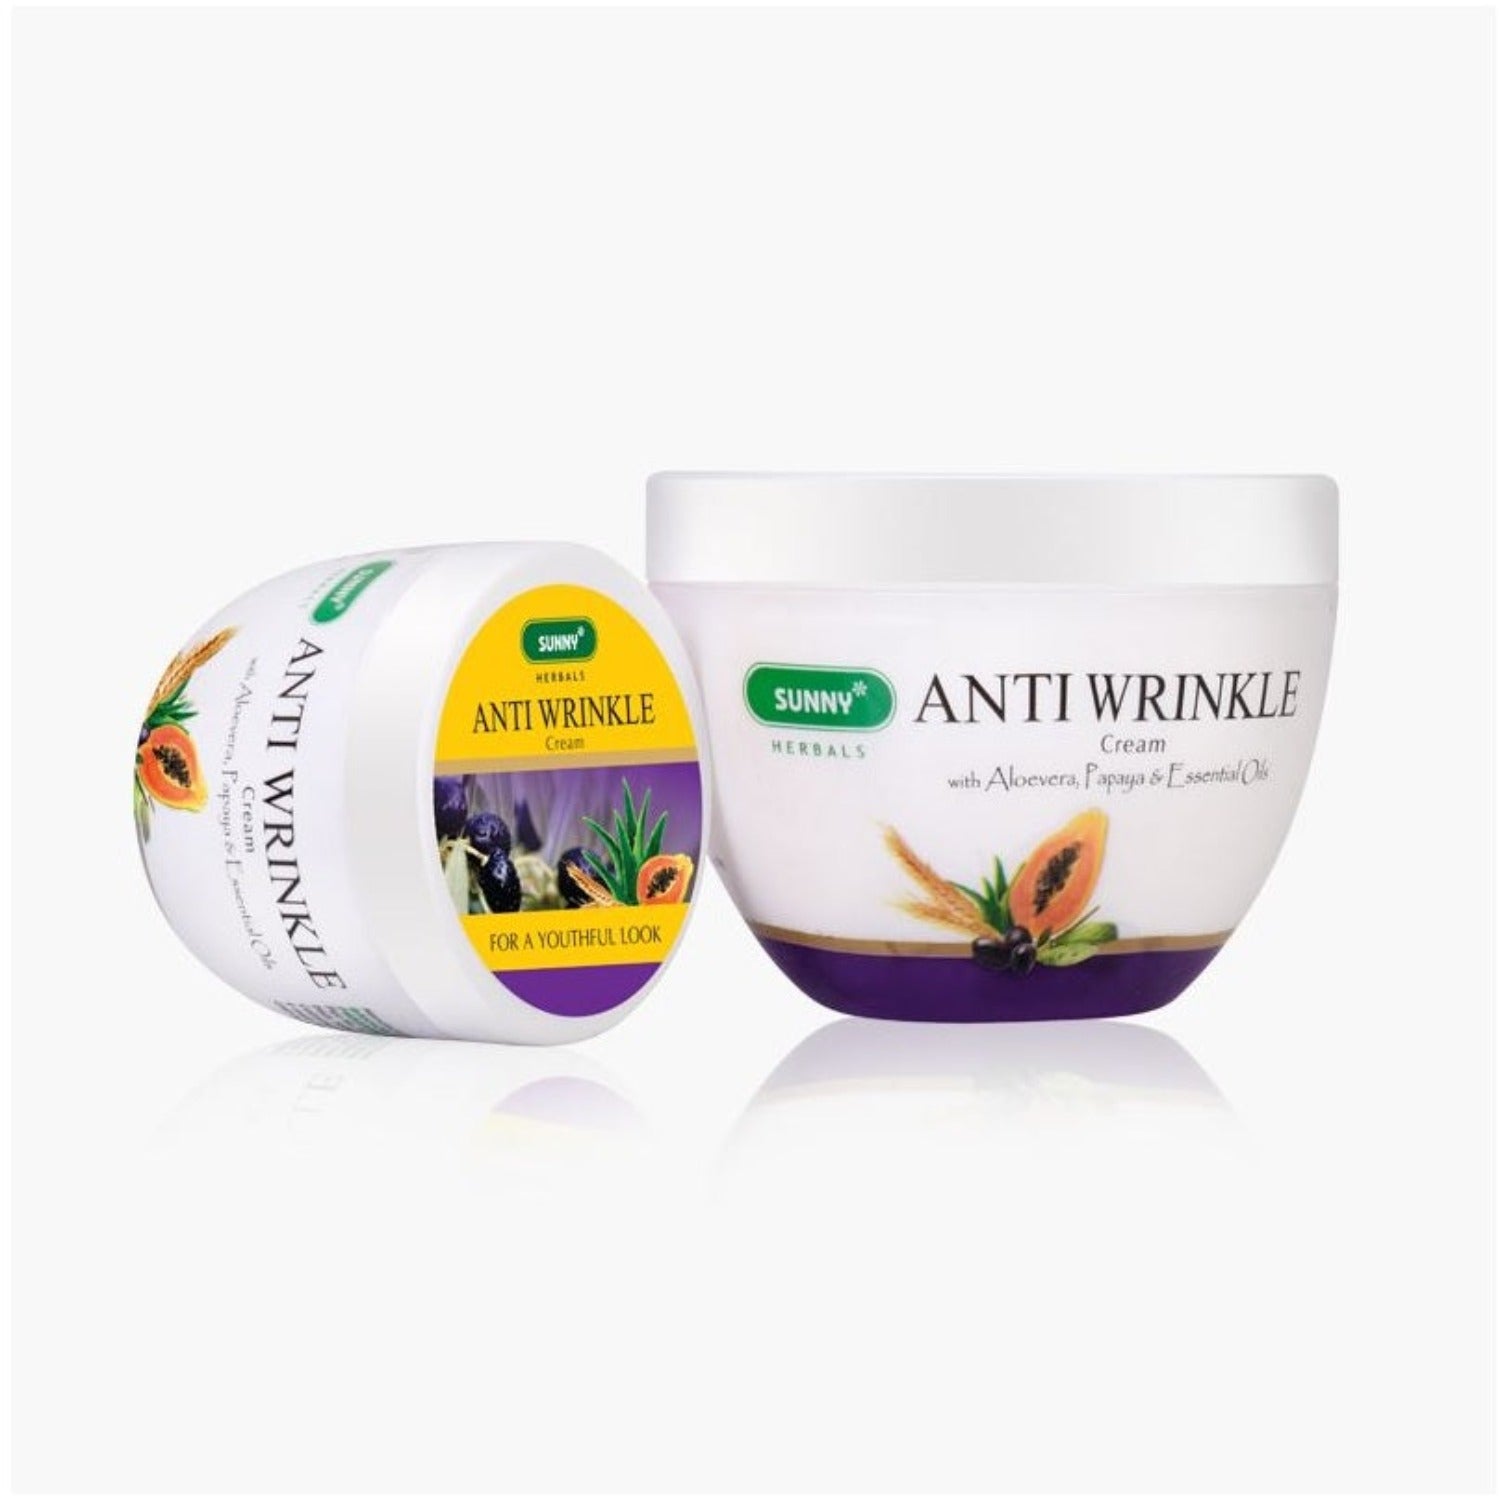 Bakson's Sunny Herbals Anti Wrinkle With Aloevera,Cucumber & Papaya For a Youthful Look Skin Care Cream